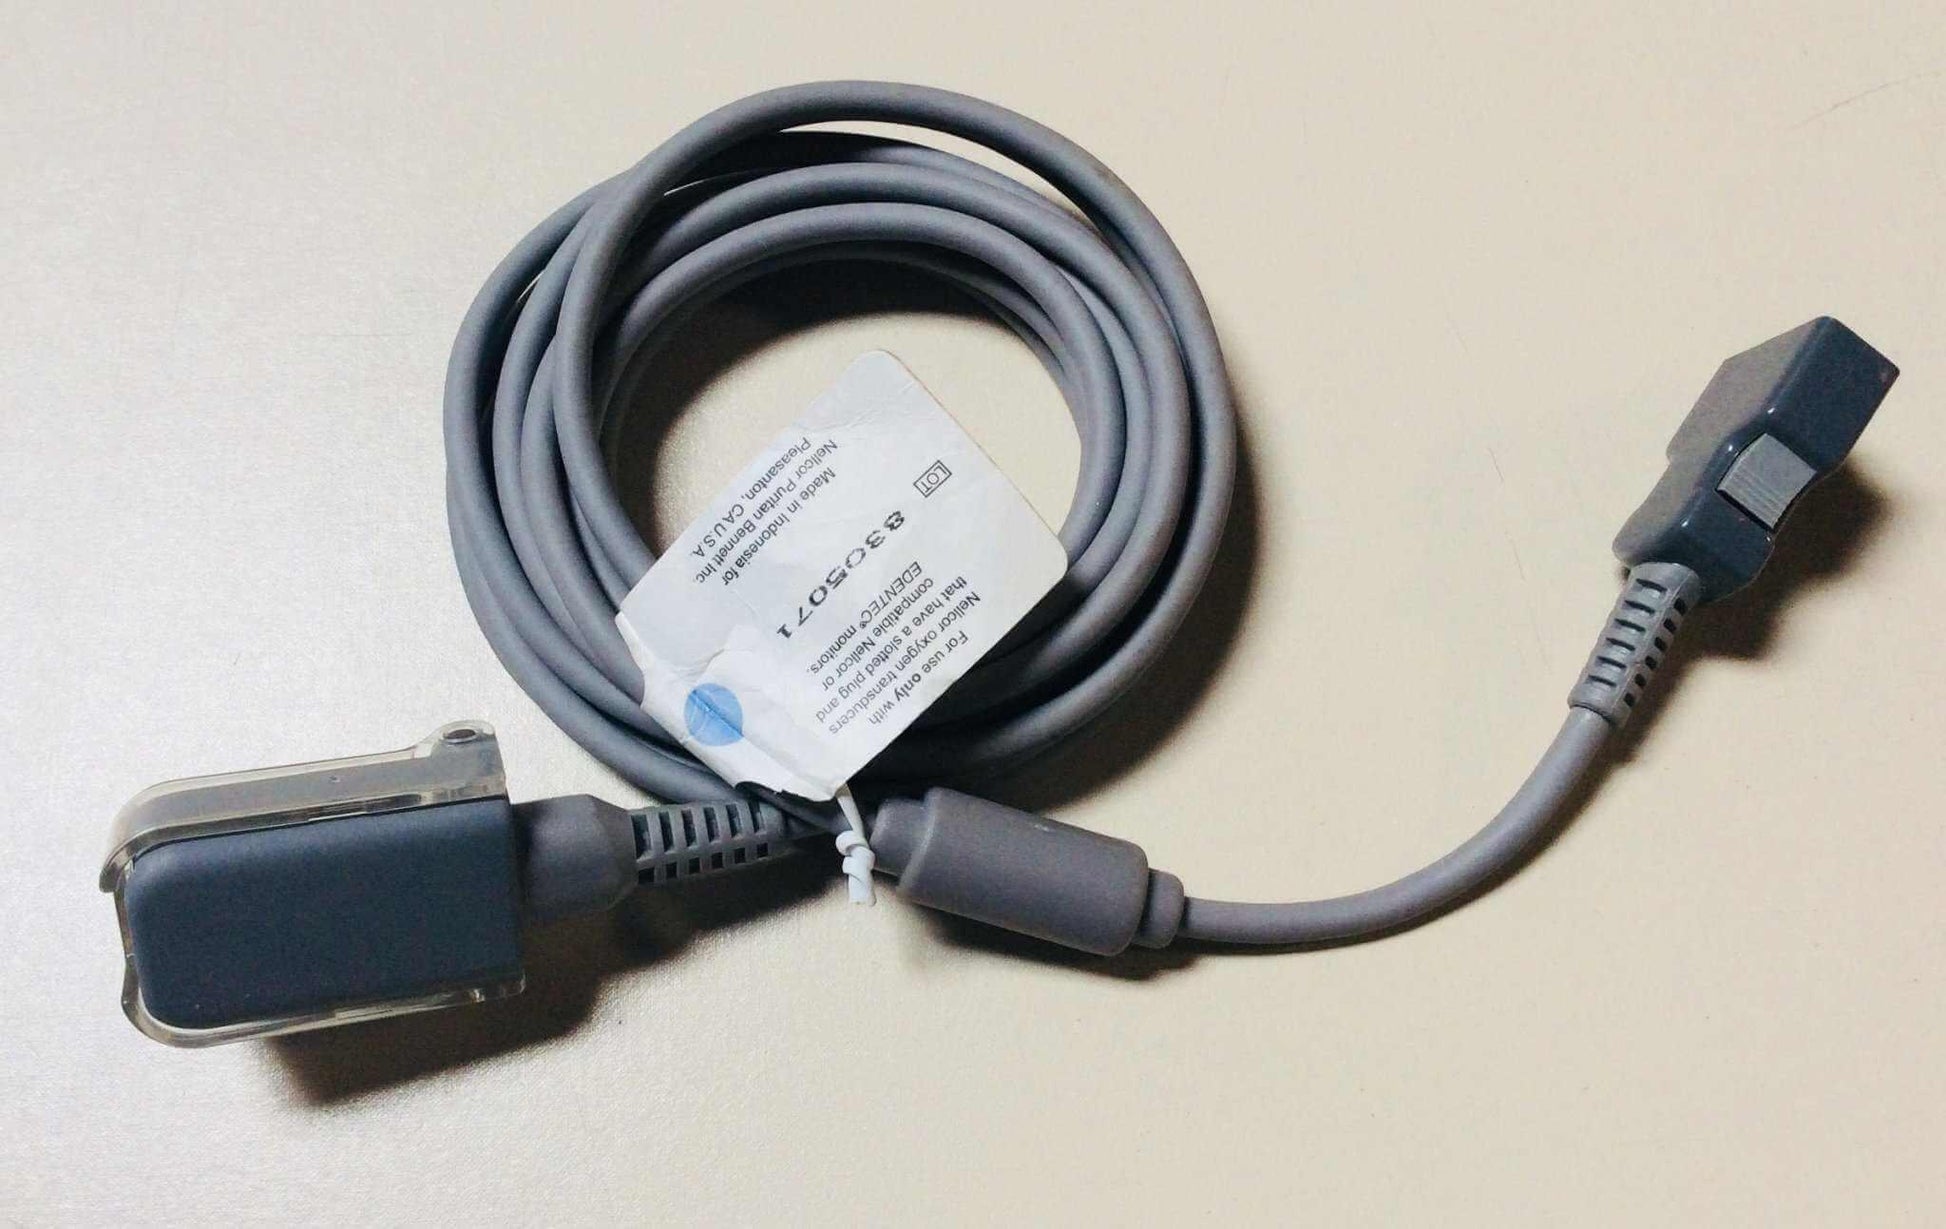 USED Nellcor Pulse Oximetry Cable SCP-10 Warranty FREE Shipping - MBR Medicals